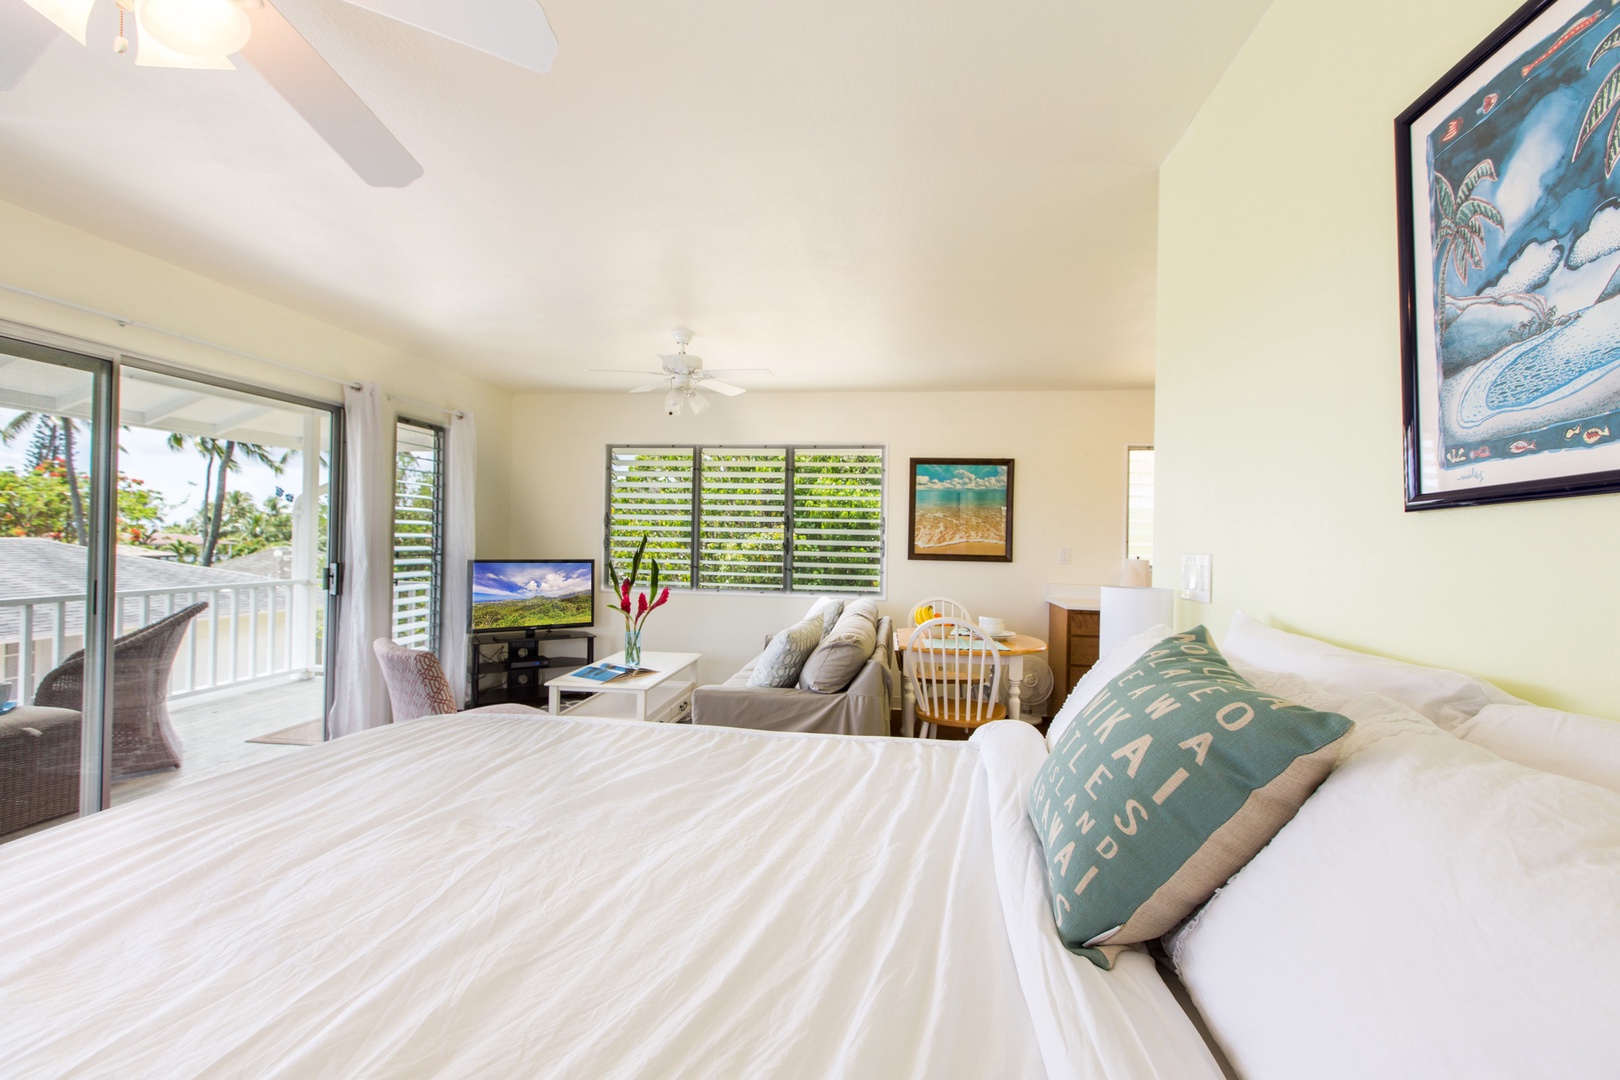 Kailua Vacation Rentals, Lanikai Cottage - Guest cottage with king bed, pull-out memory foam sofa bed, and new split air conditioning!